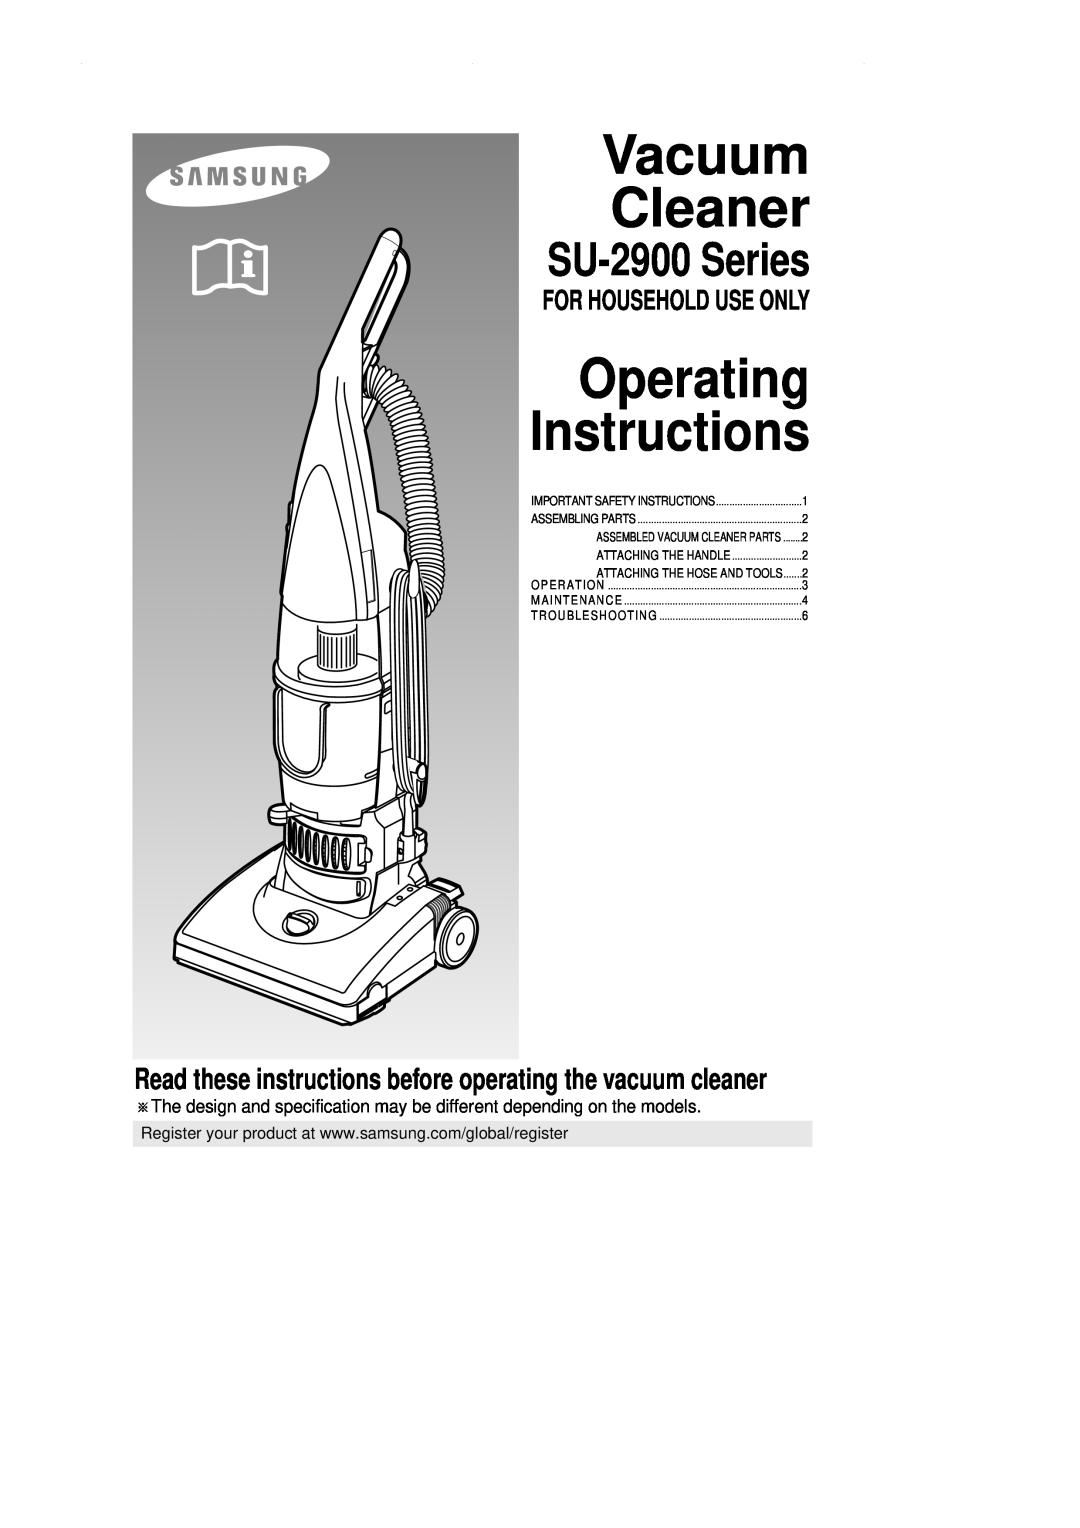 Samsung operating instructions Vacuum Cleaner, Operating Instructions, SU-2900Series, For Household Use Only 